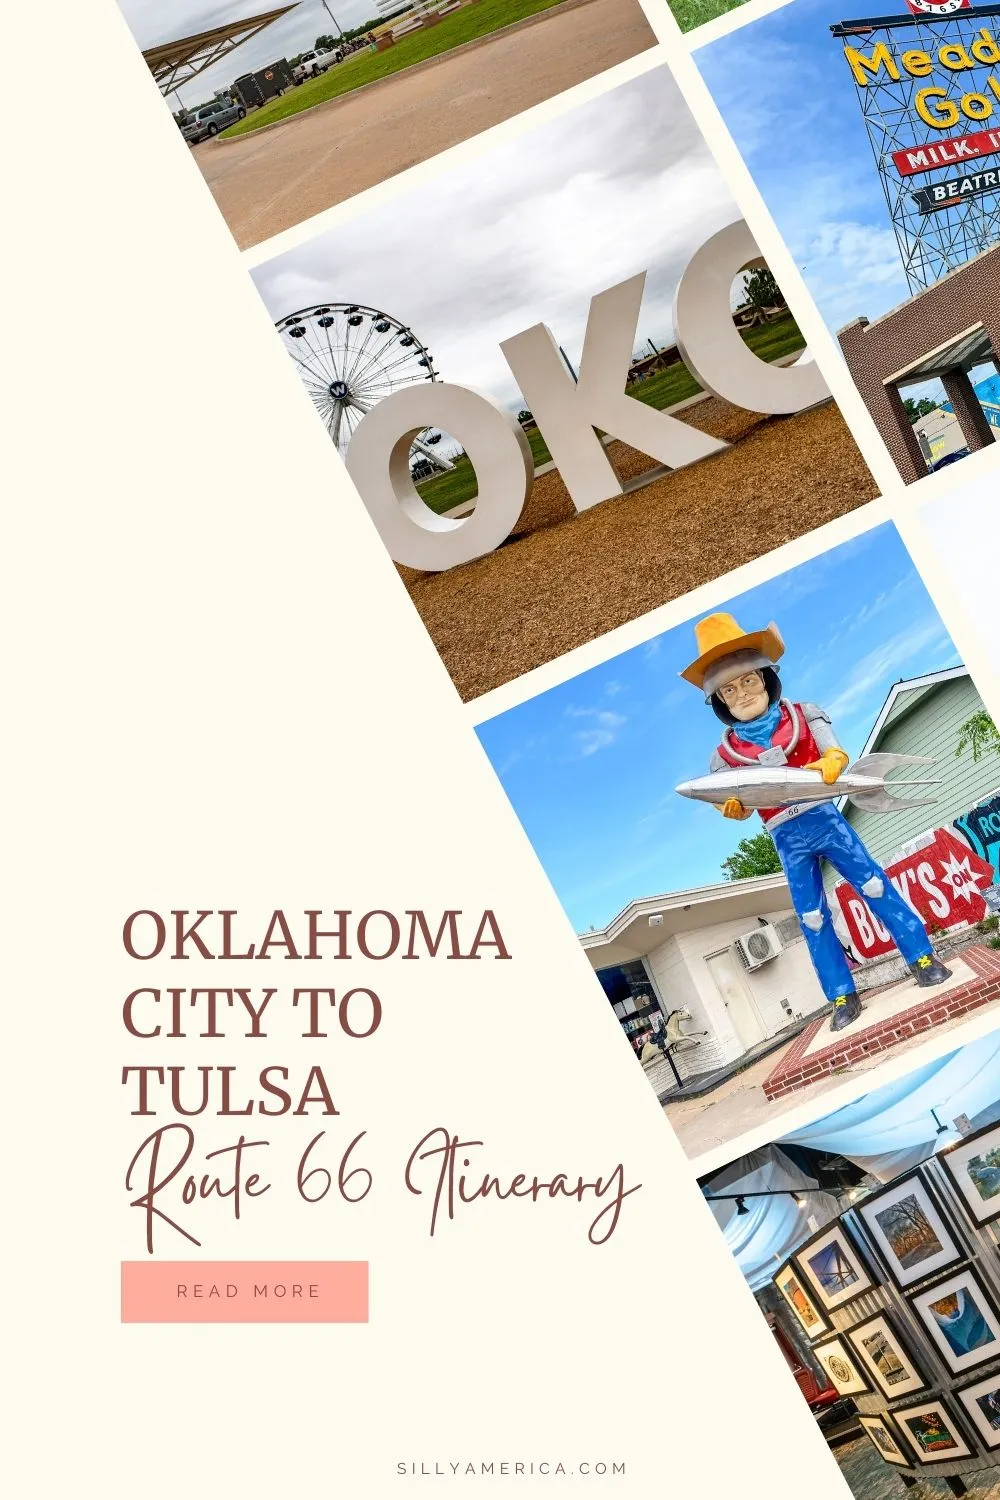 Oklahoma has the longest stretch of Route 66 within its borders, with over 400 miles of the famed Mother Road. Two of the best destinations on the route are located in the state too: Oklahoma City and Tulsa. Located only about 120 miles apart, taking a road trip from Oklahoma City to Tulsa makes for a fun and easy drive with lots of interesting stops on both ends and in between. Use this Oklahoma City to Tulsa Route 66 itinerary to craft your road trip. #Route66 #Oklahoma #OklahomaRoadTrip